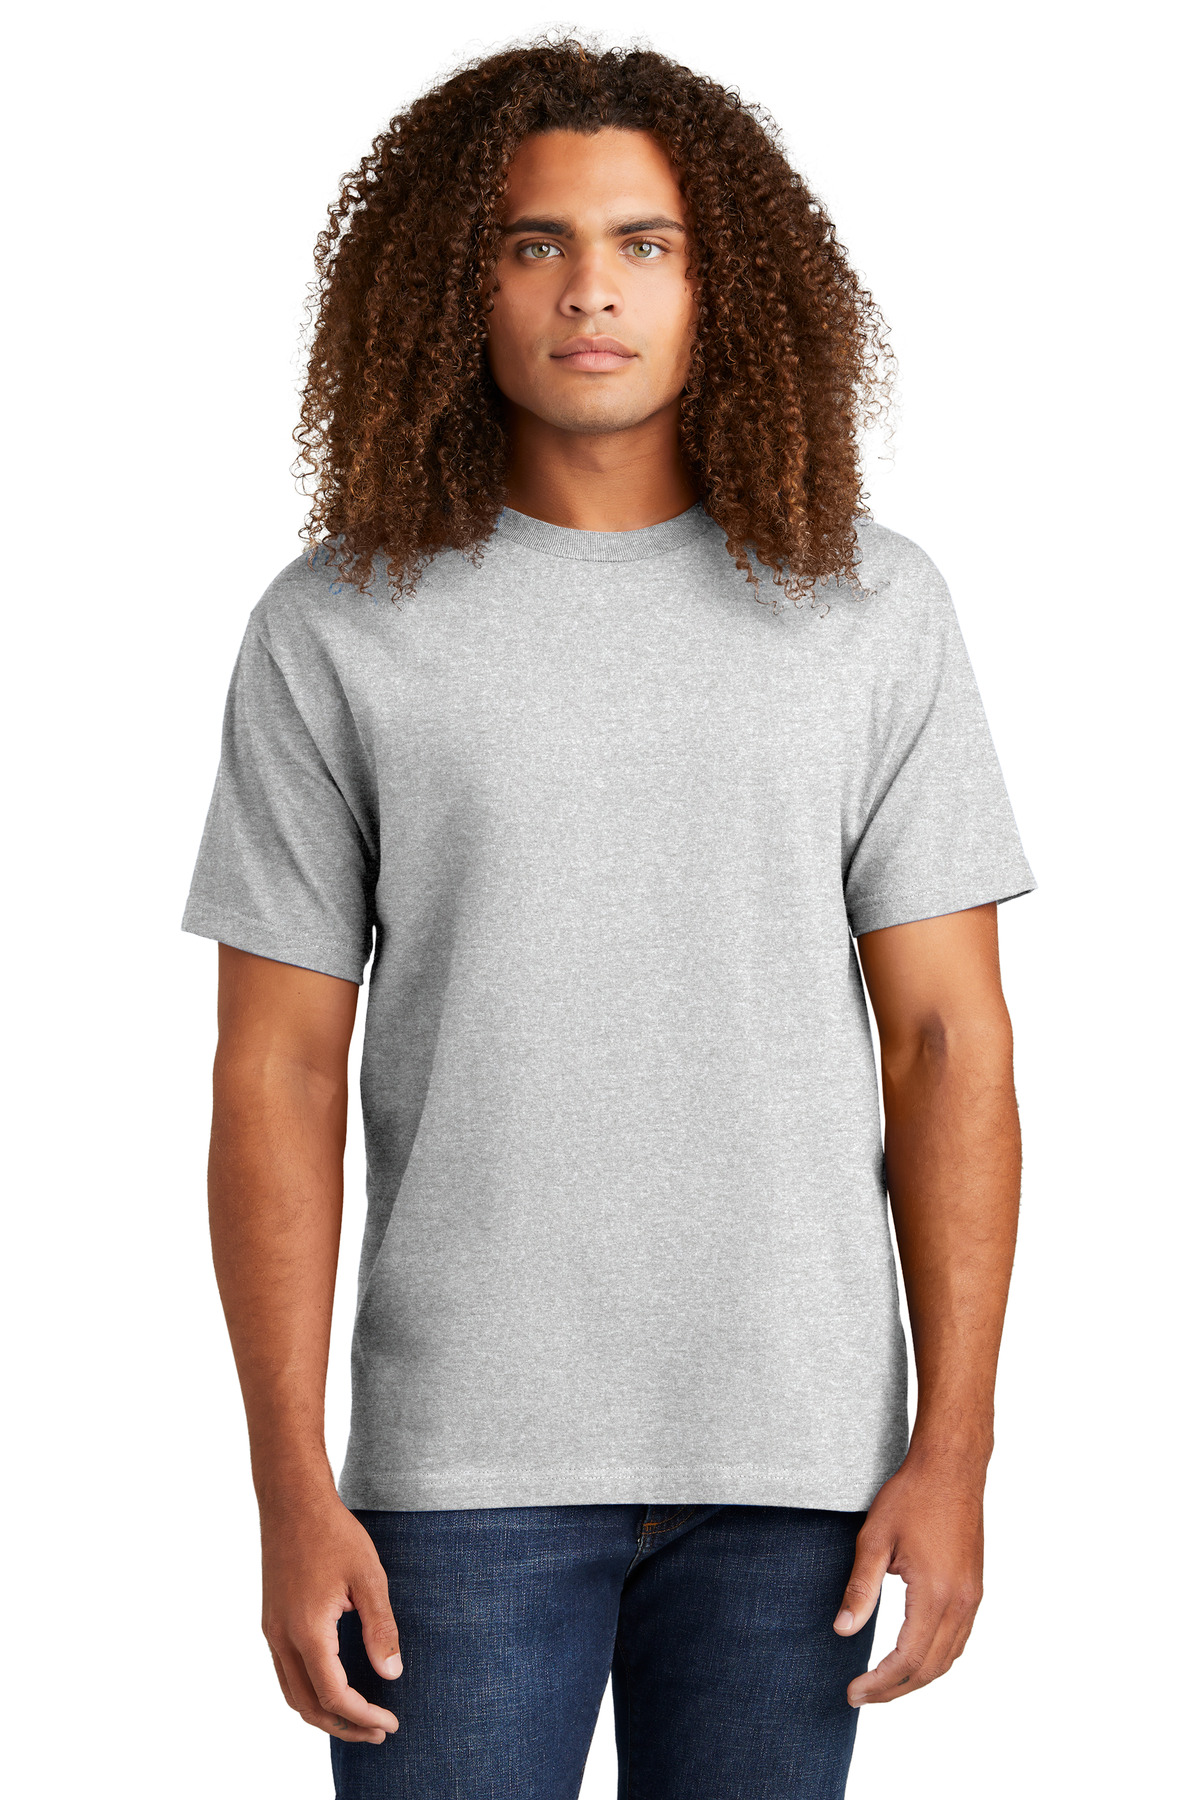 American Apparel Relaxed T-Shirt 1301W